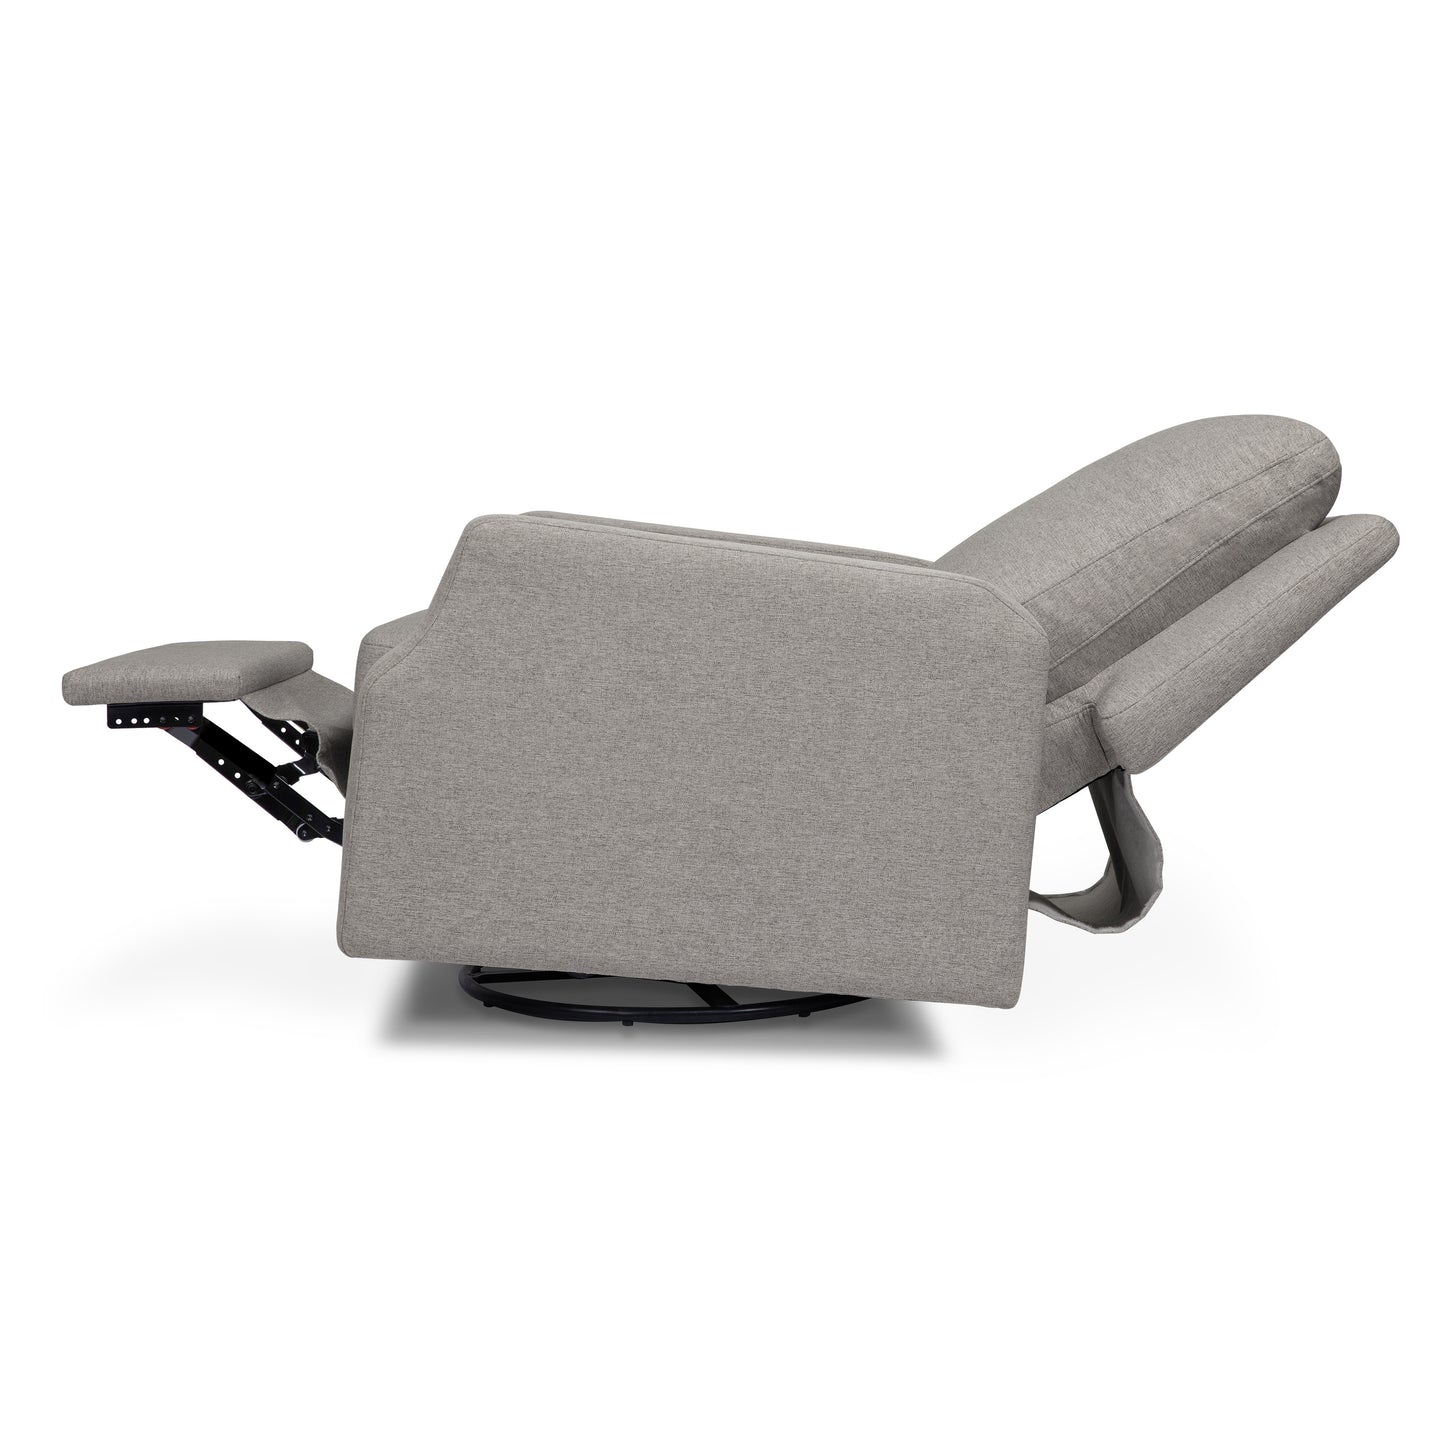 M22287PGEW,Crewe Recliner and Swivel Glider in Performance Grey Eco-Weave